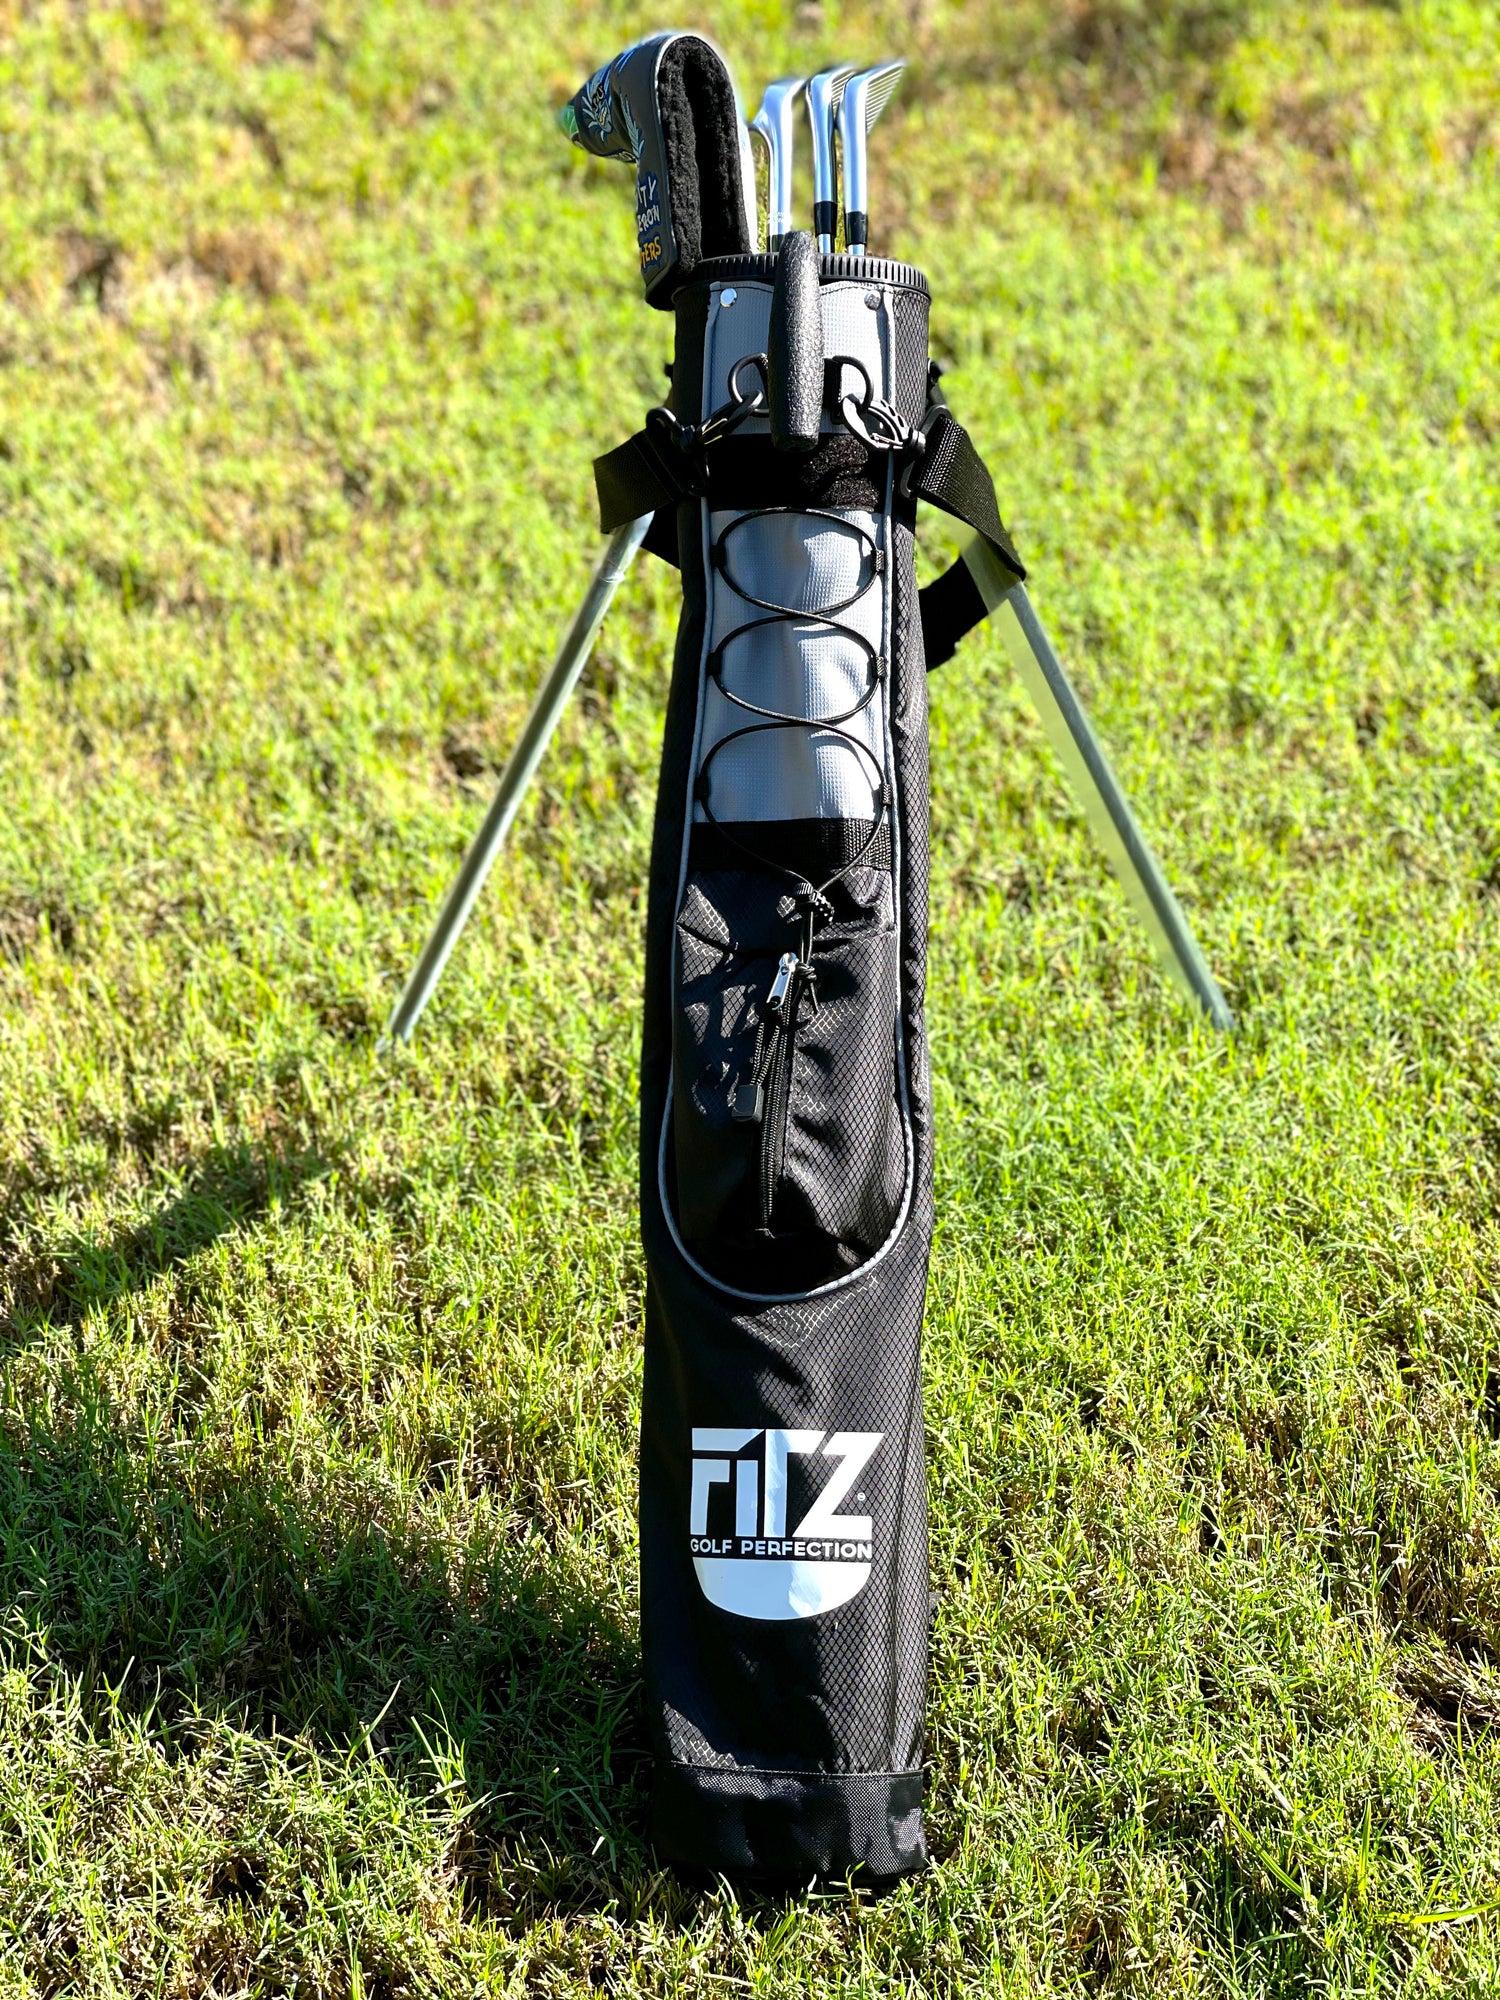 Golf Bags and Accessories